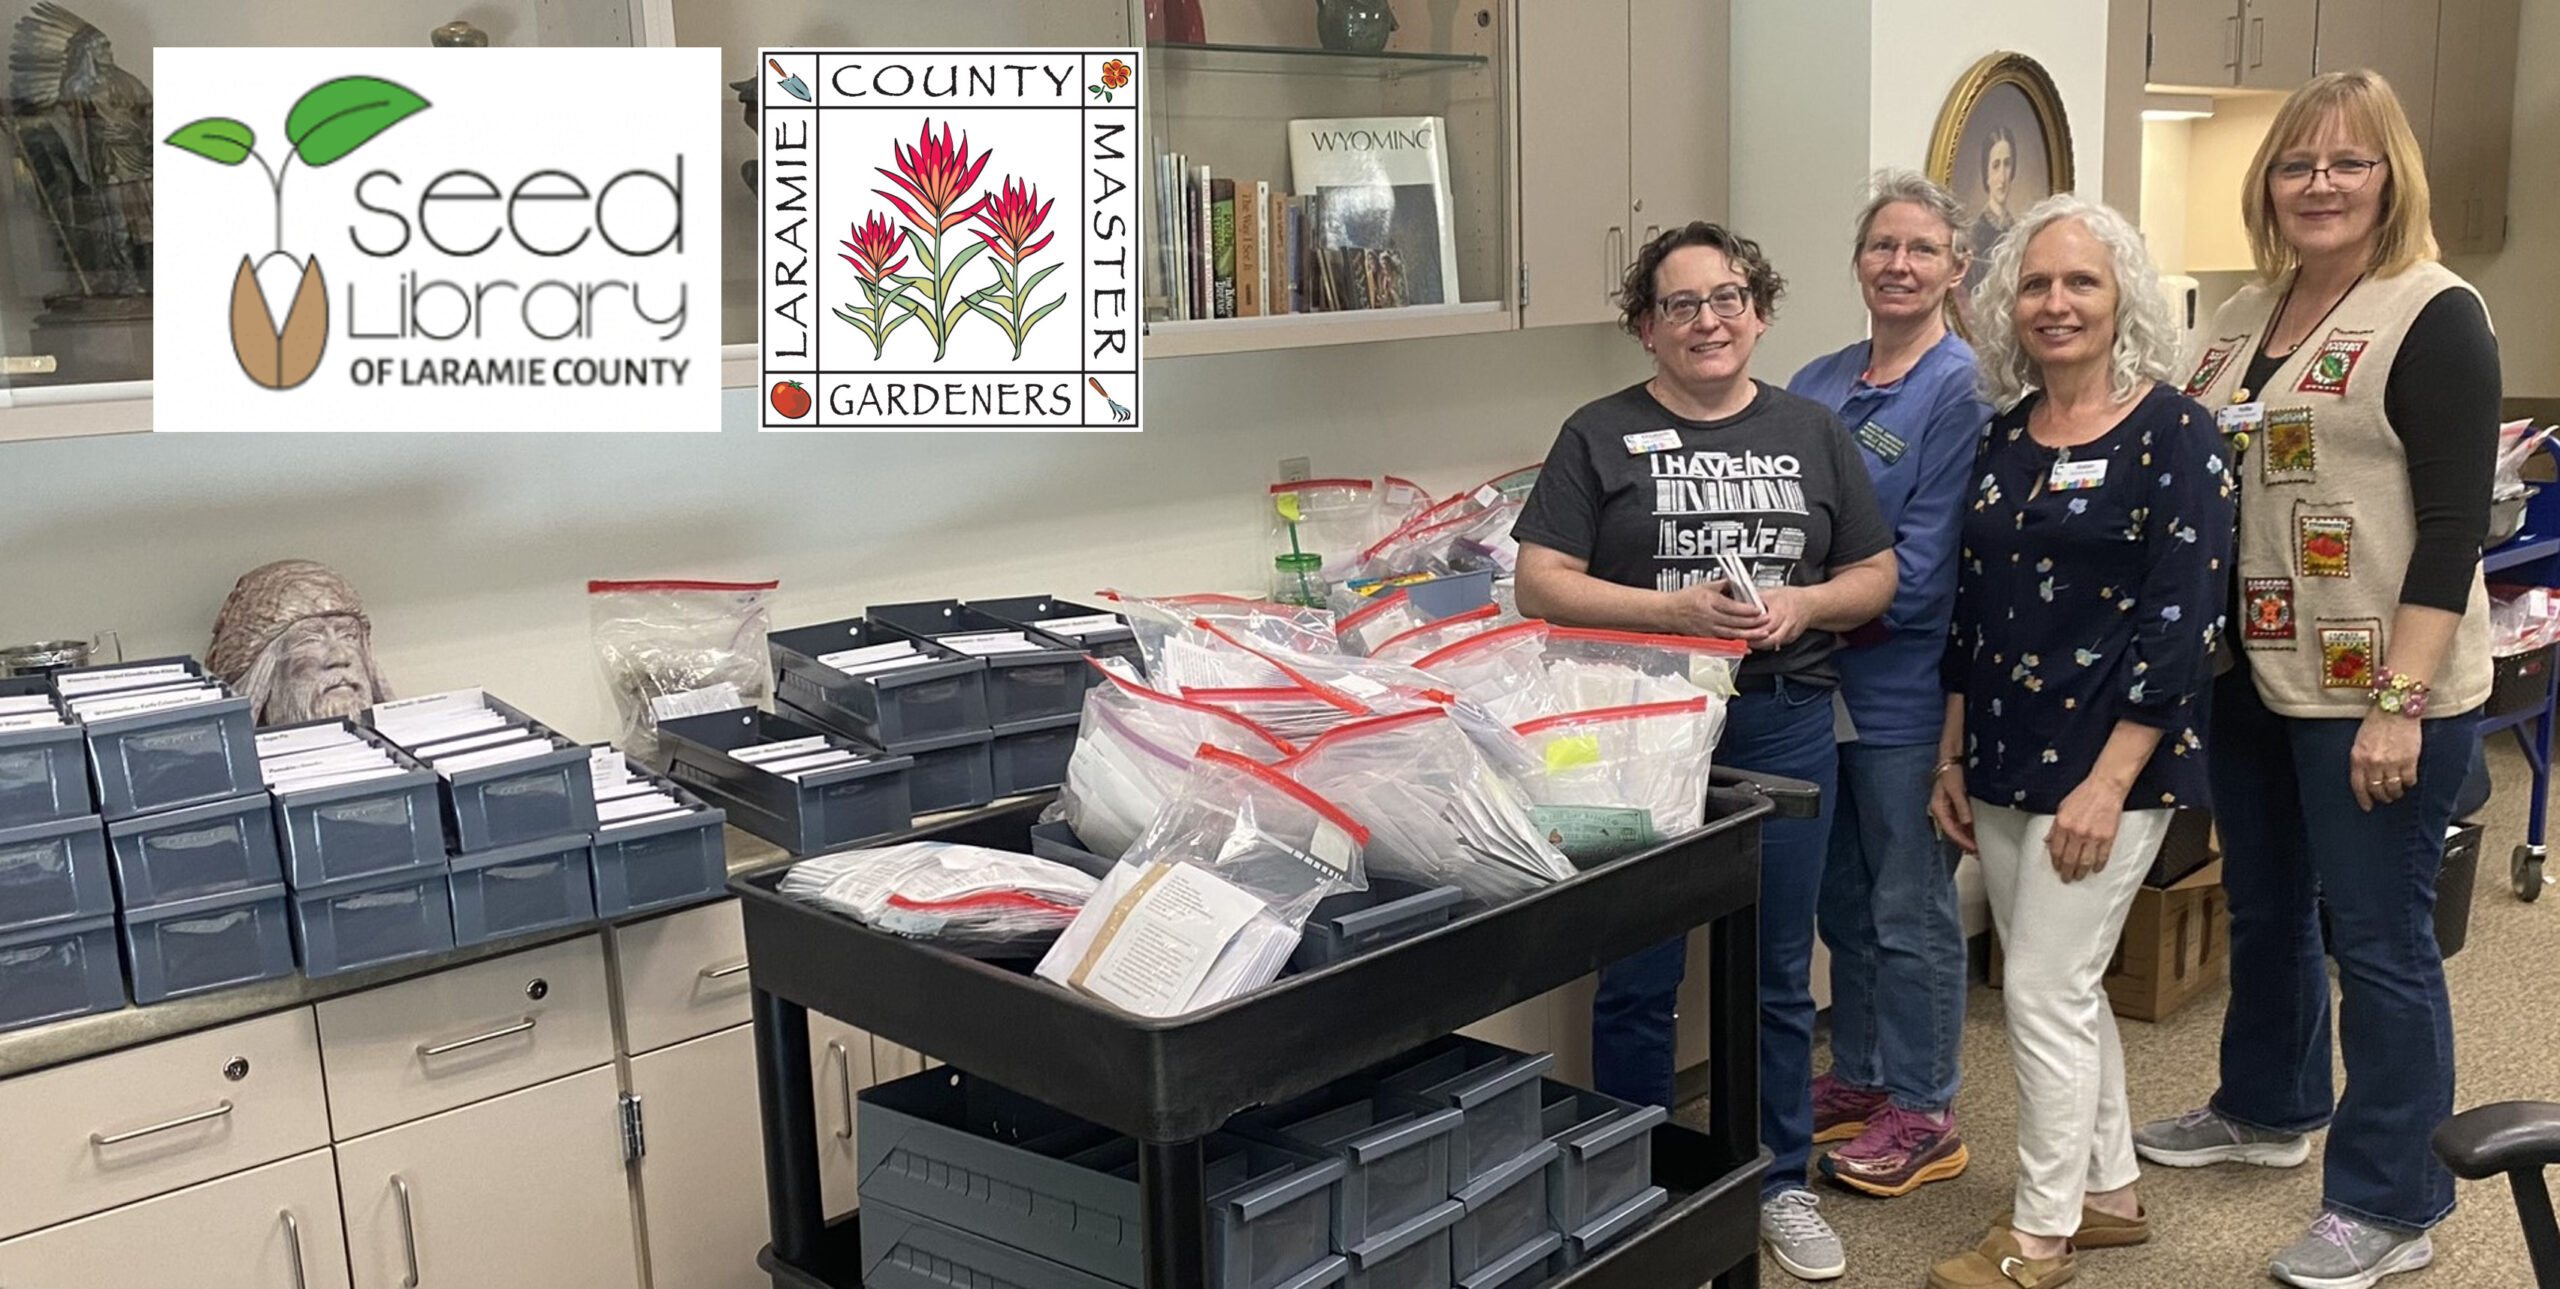 Laramie County Seed Library Co-Chairs & Volunteers standing next to Seed Library Supplies